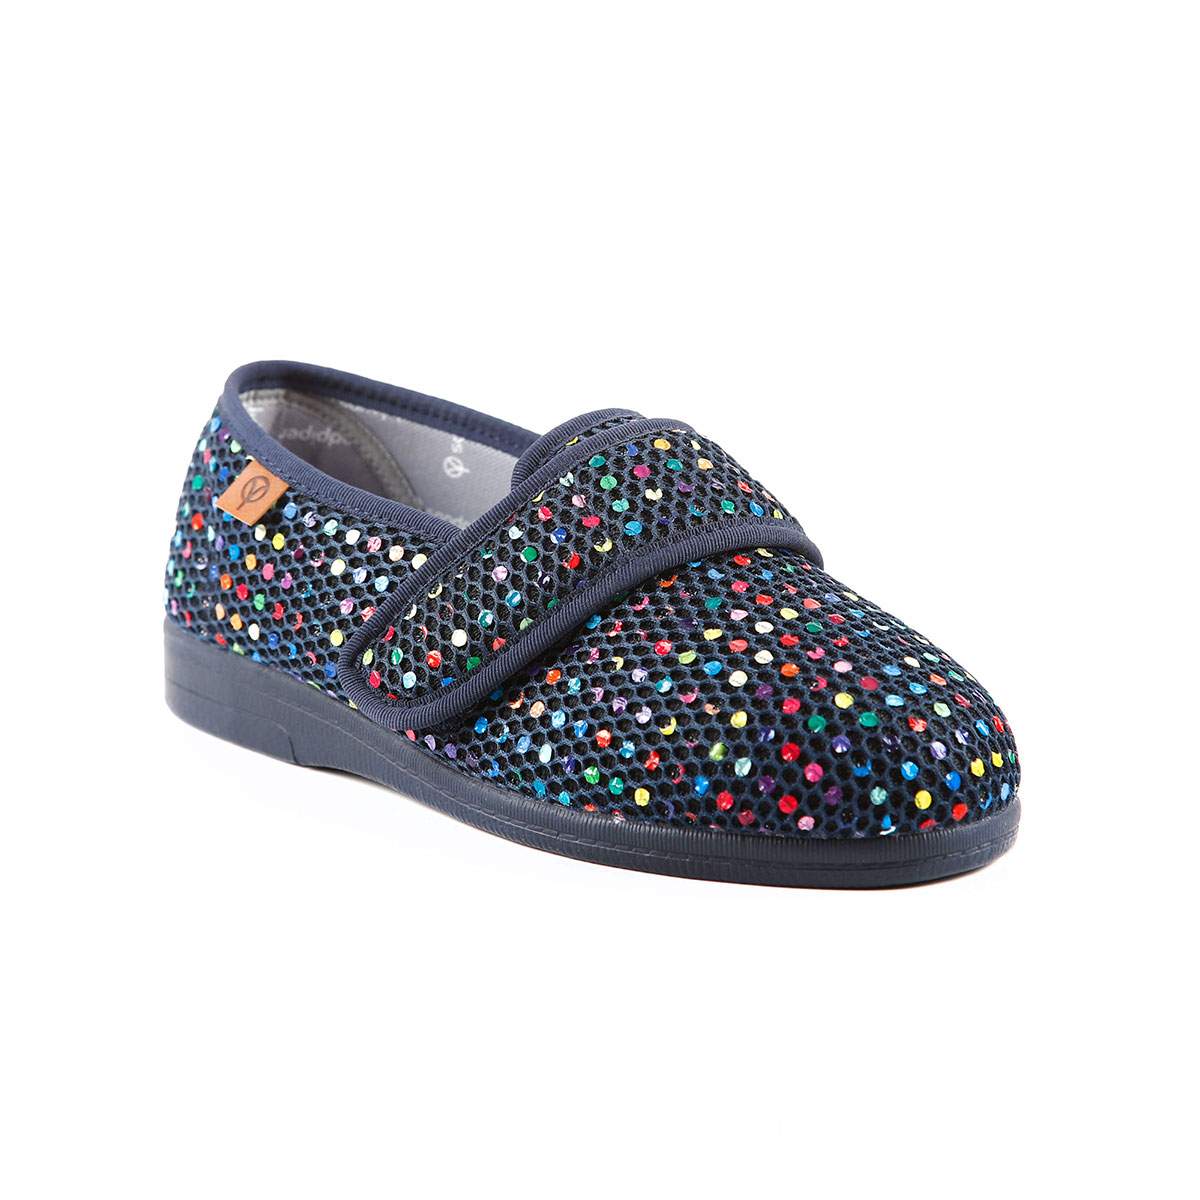 Navy with multi colour spots pattern Sophie slipper